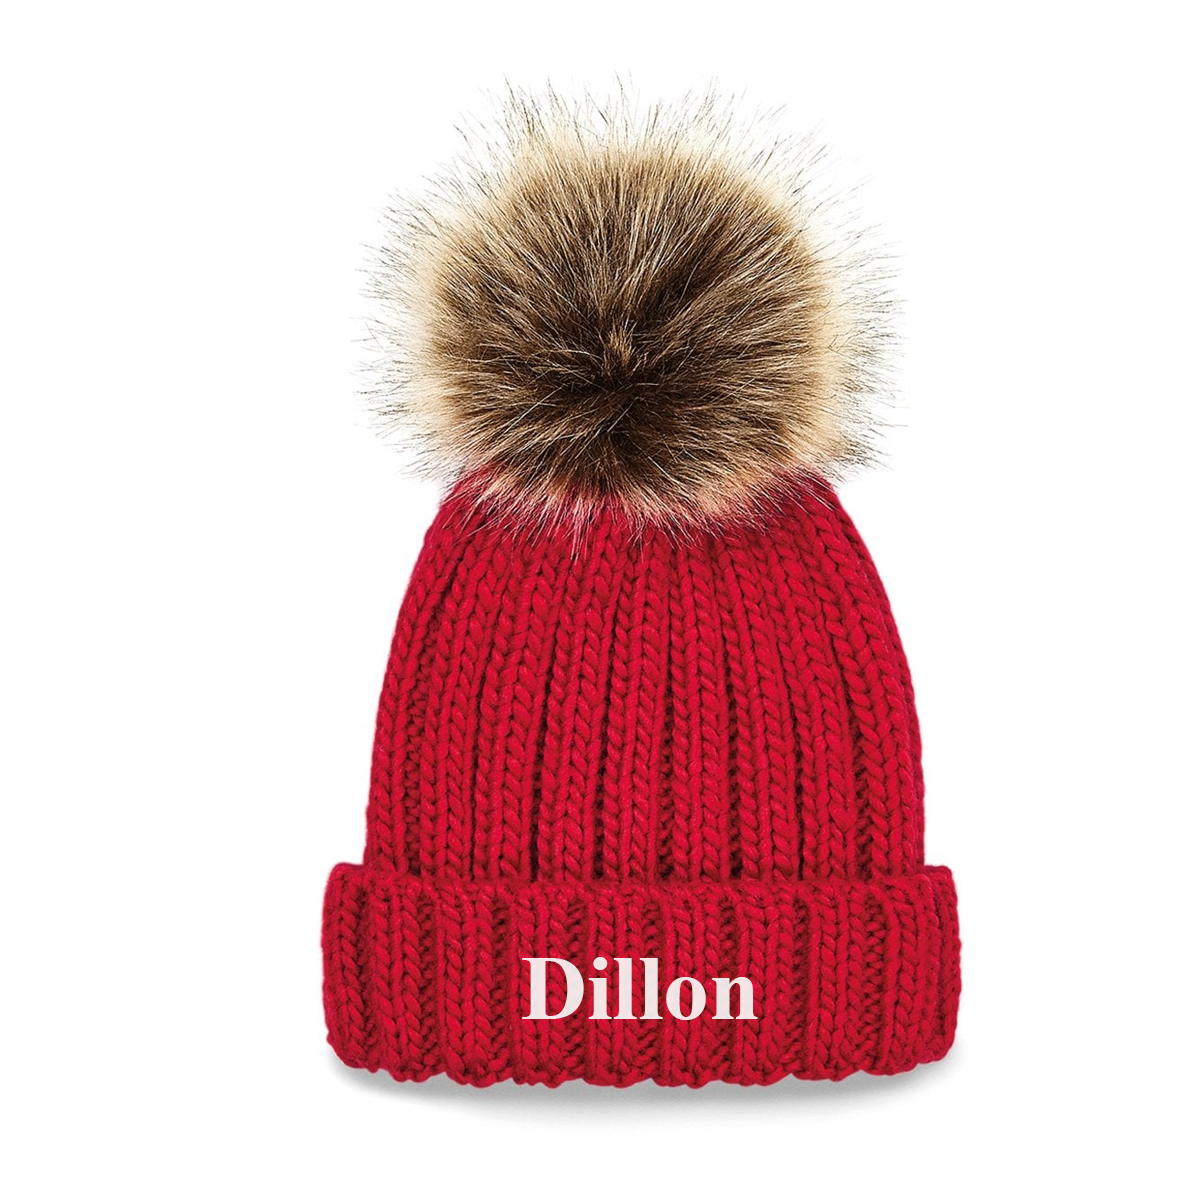 Red Embroidered Chunky Knit Beanie Hat - Infants, Junior & Adult sizes